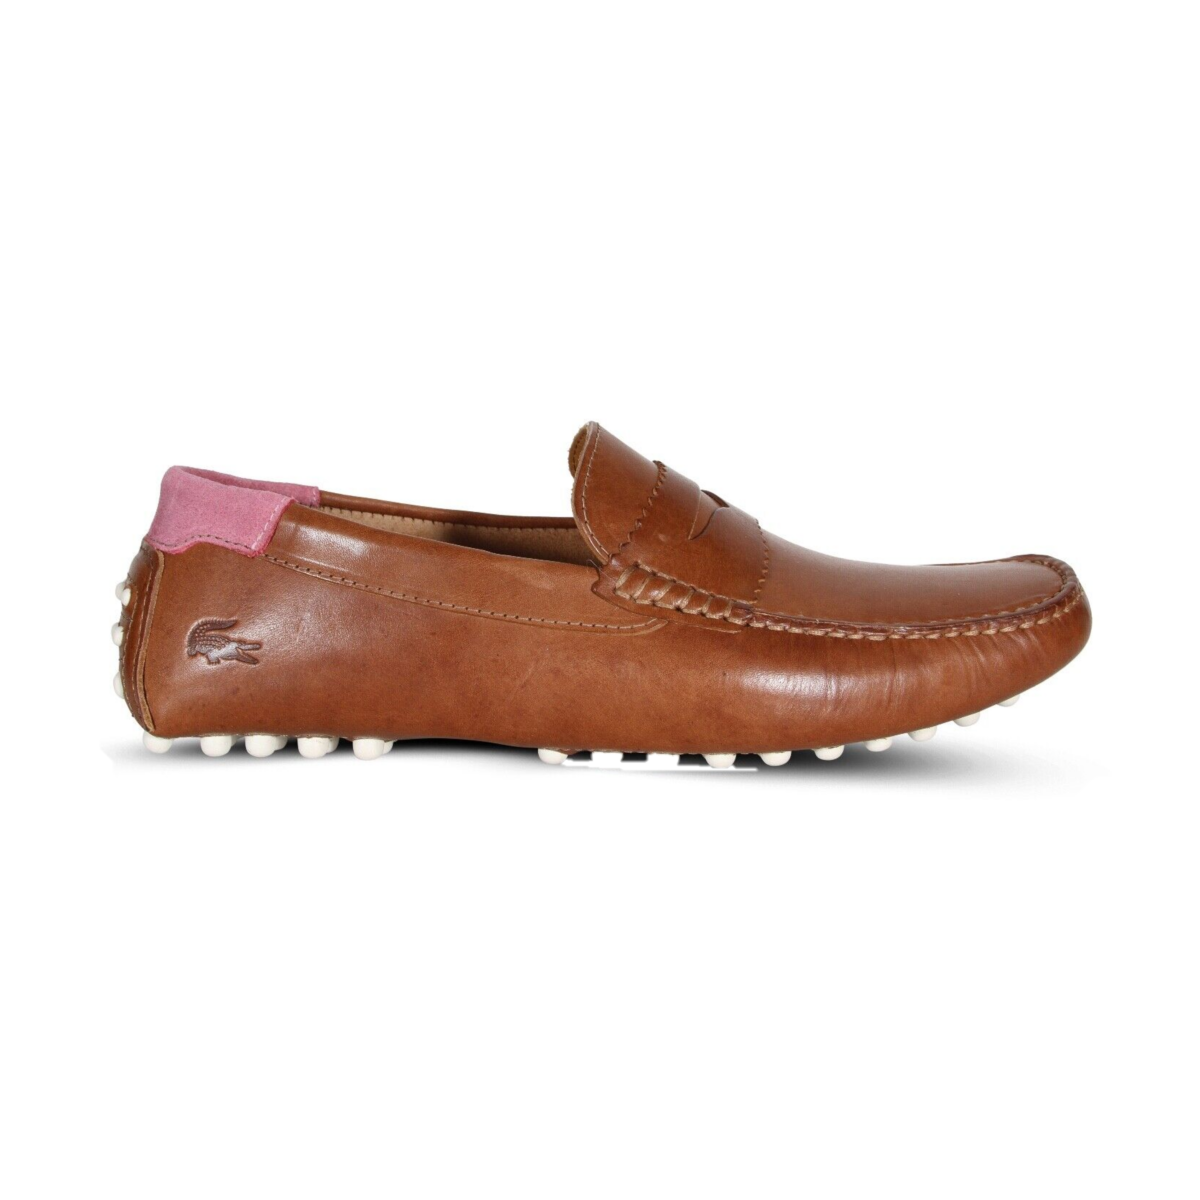 LACOSTE 7-45CMA0032F57 CONCOURS 123 MN'S (Medium) Tan/Off White Leather Lifestyle Loafers